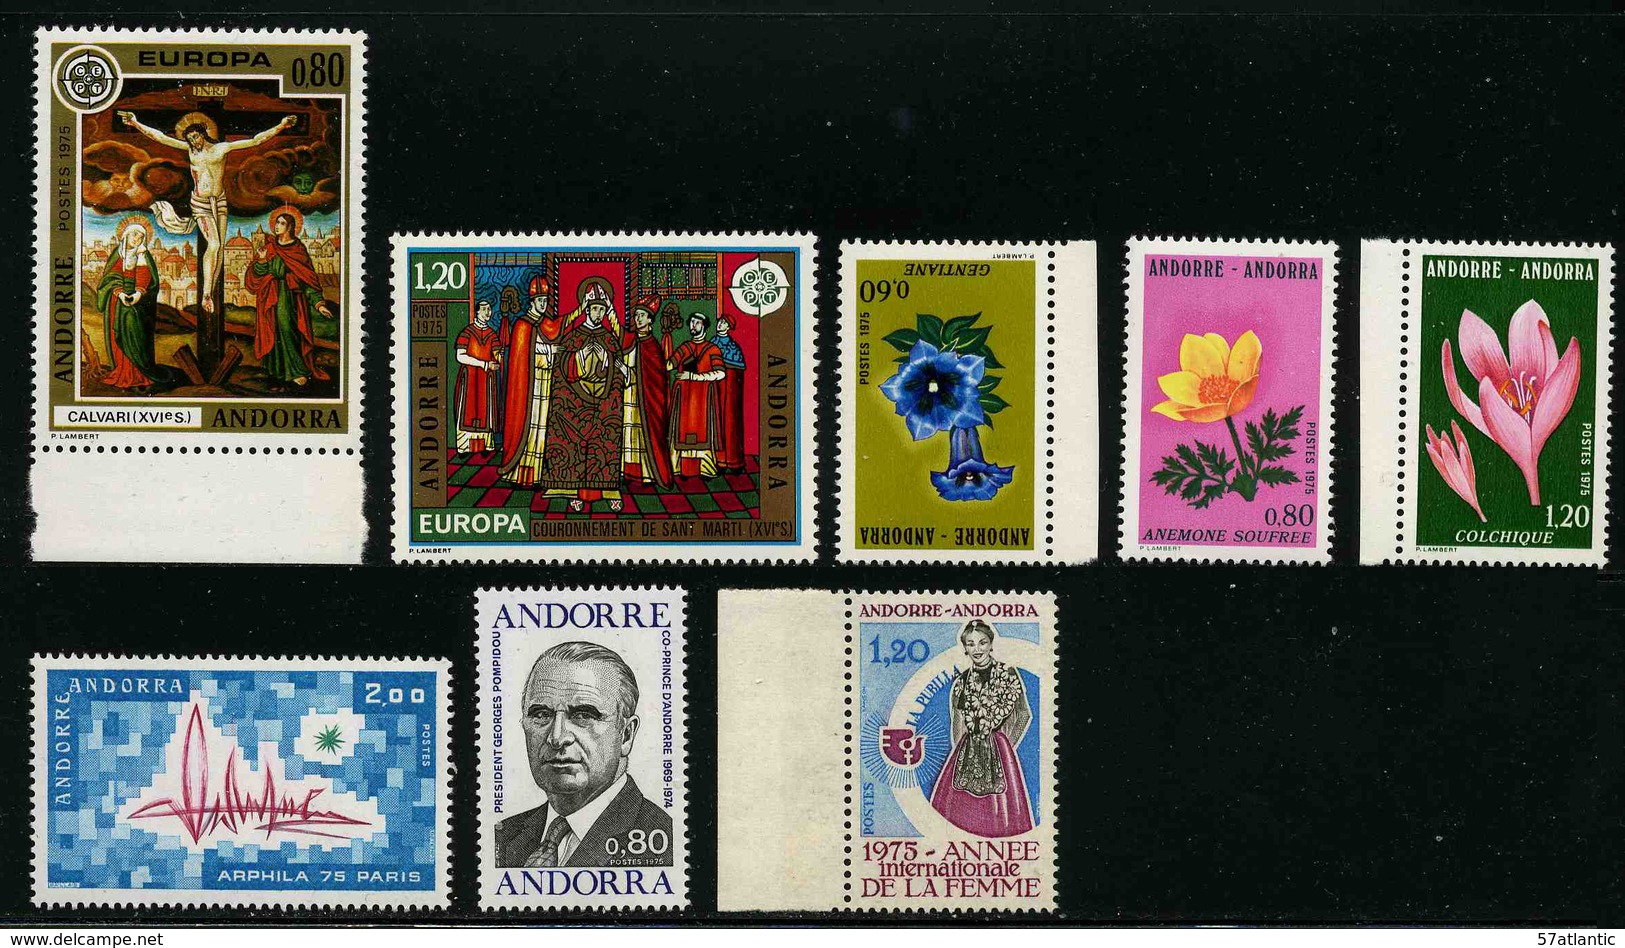 ANDORRE FRANCAIS - ANNEE COMPLETE 1975 - YT 243 à 250 ** -  TIMBRES NEUFS ** - Full Years